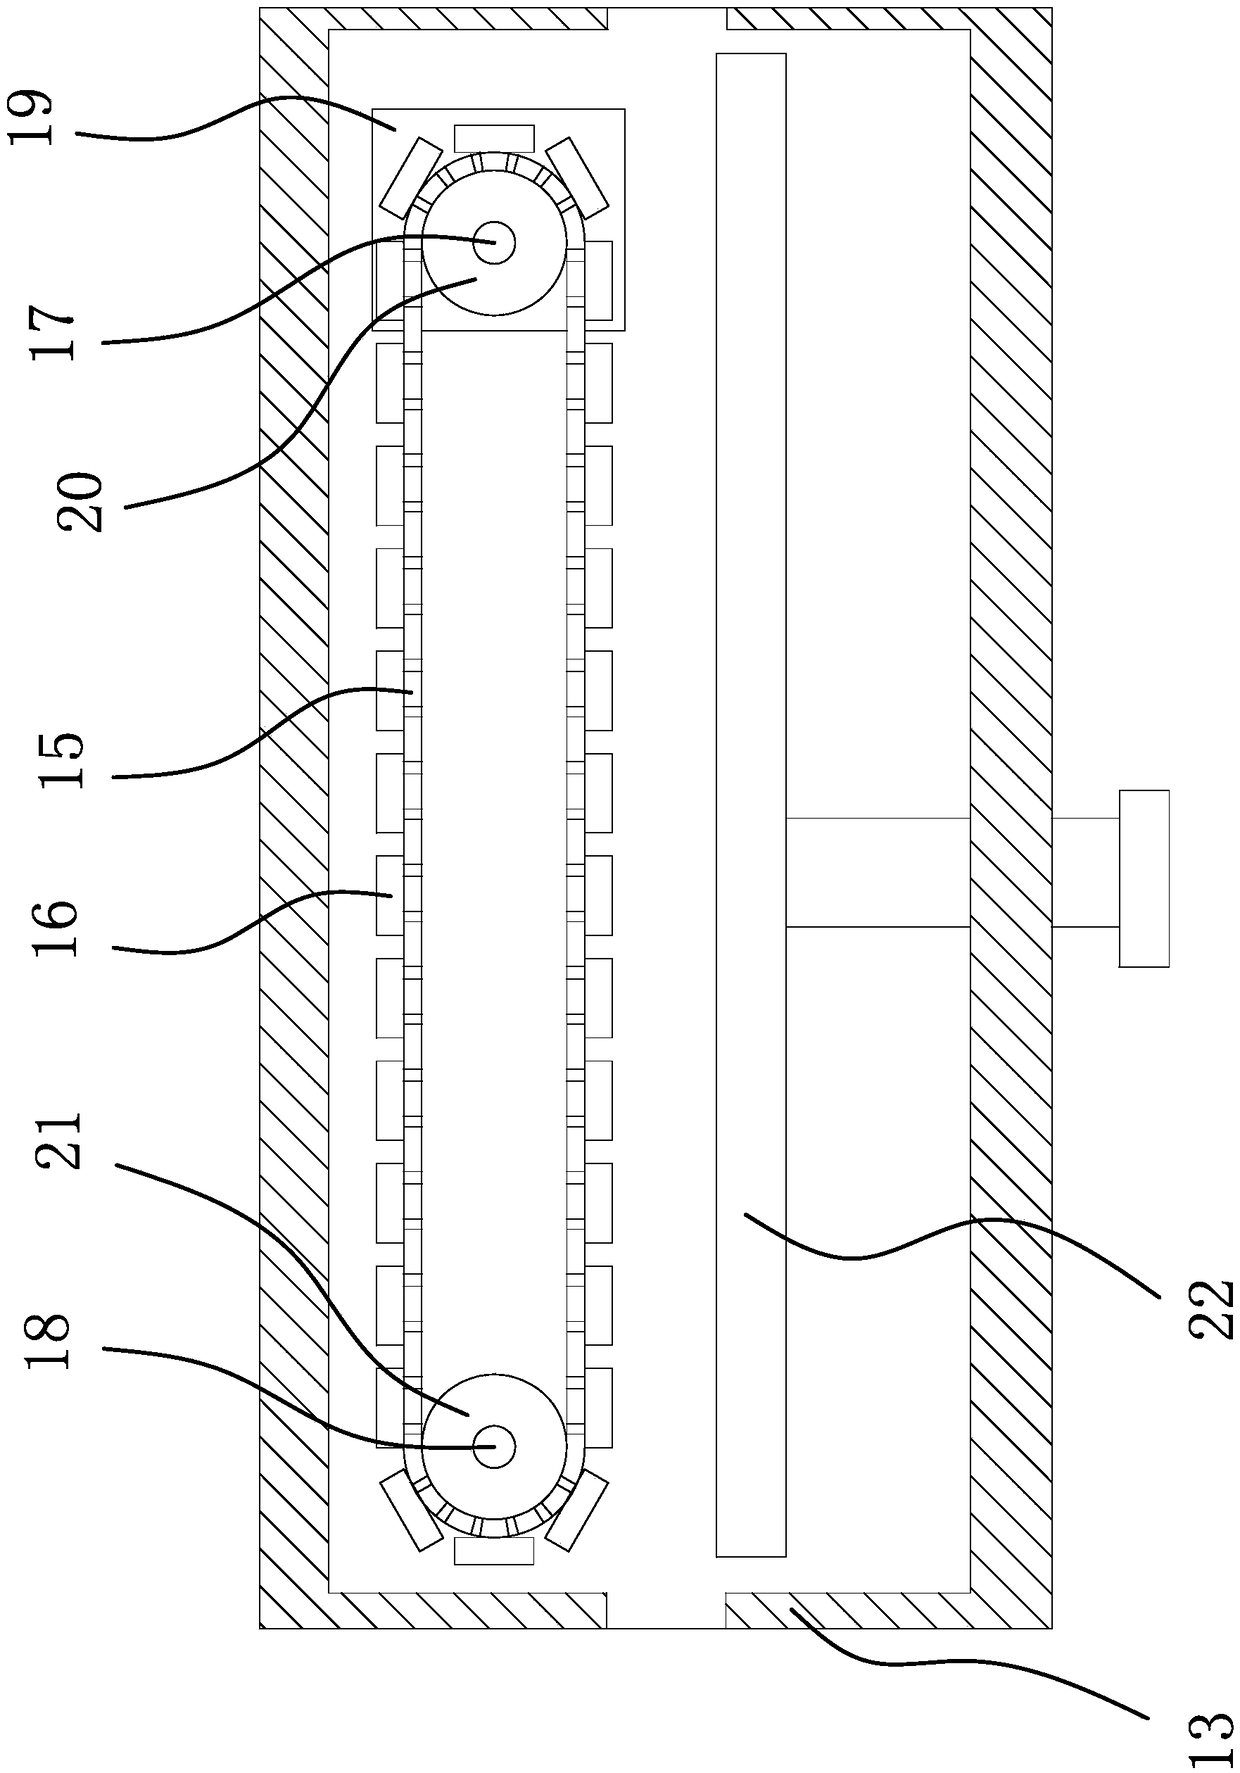 Full-automatic assembly device for luggage connecting piece